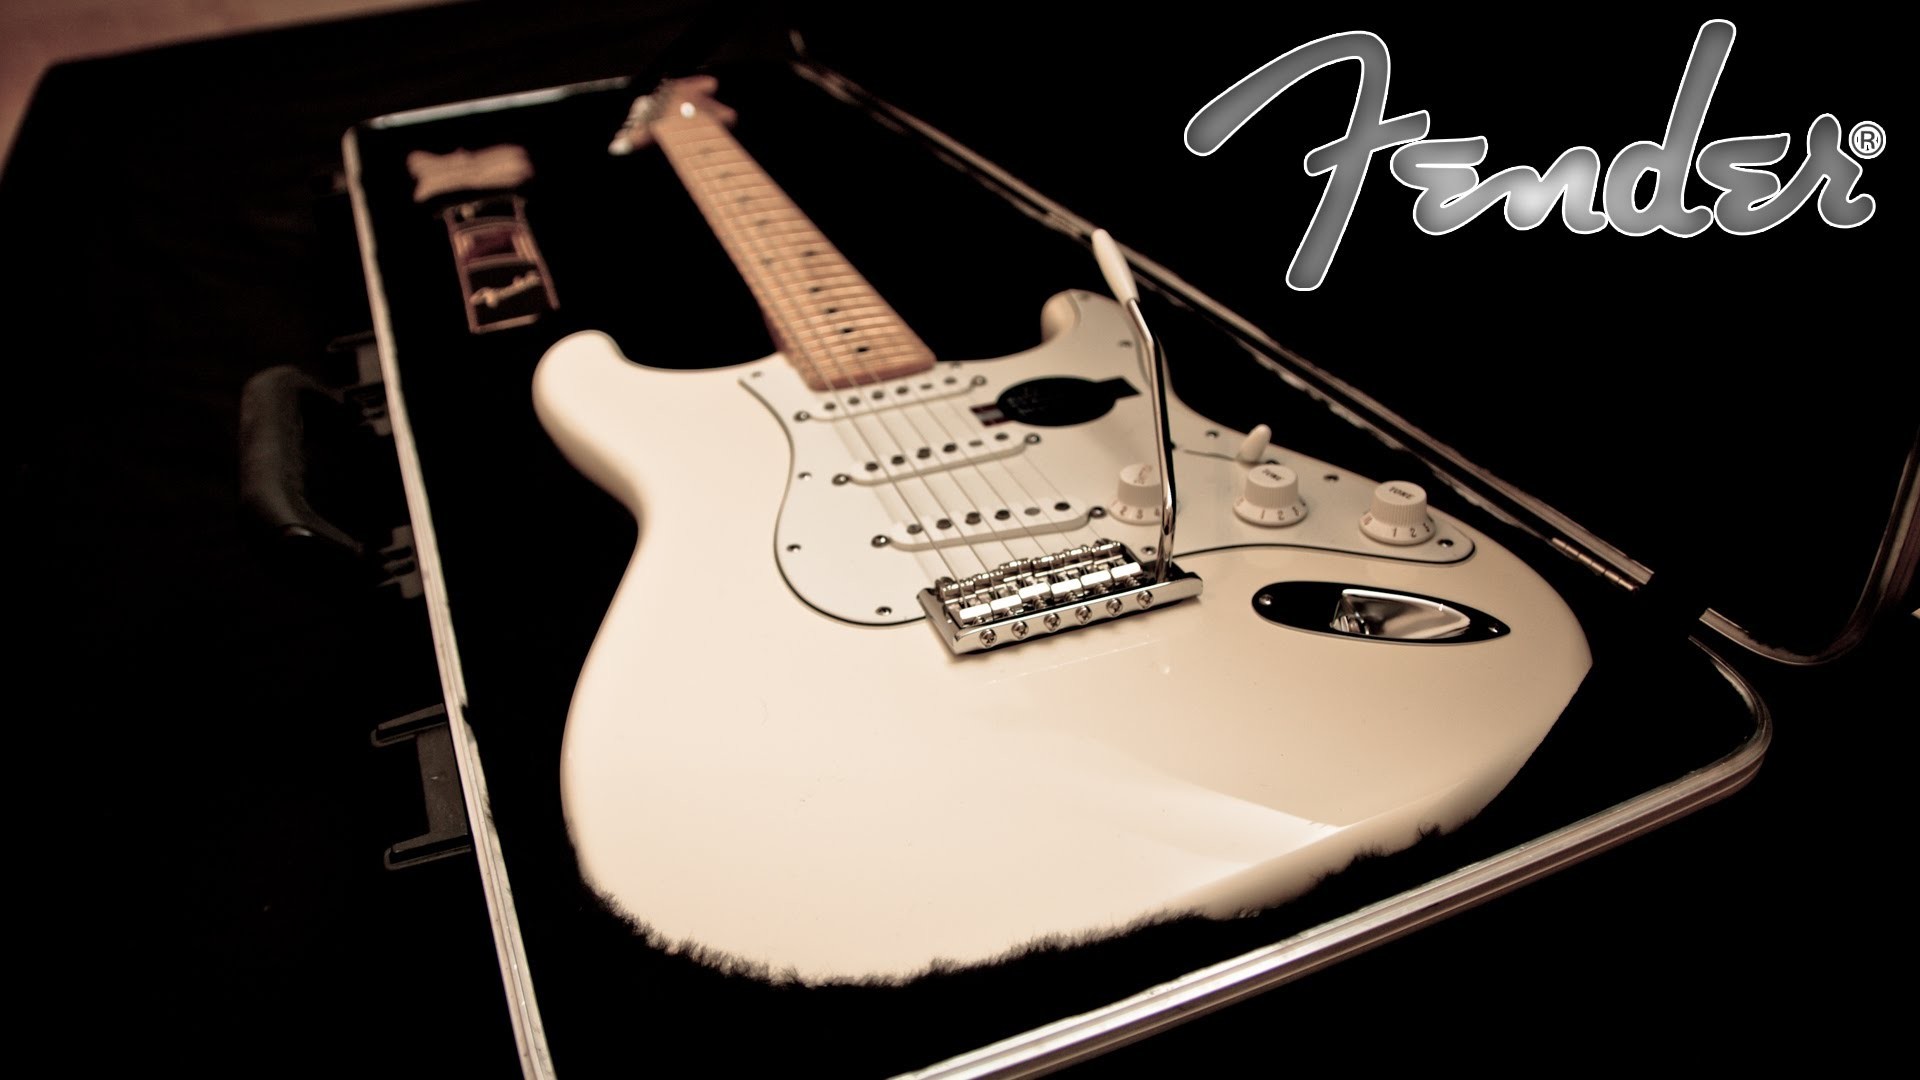 1920x1080, Fender American Stratocaster Unboxing 1080p - Fender Stratocaster American Special Ow - HD Wallpaper 